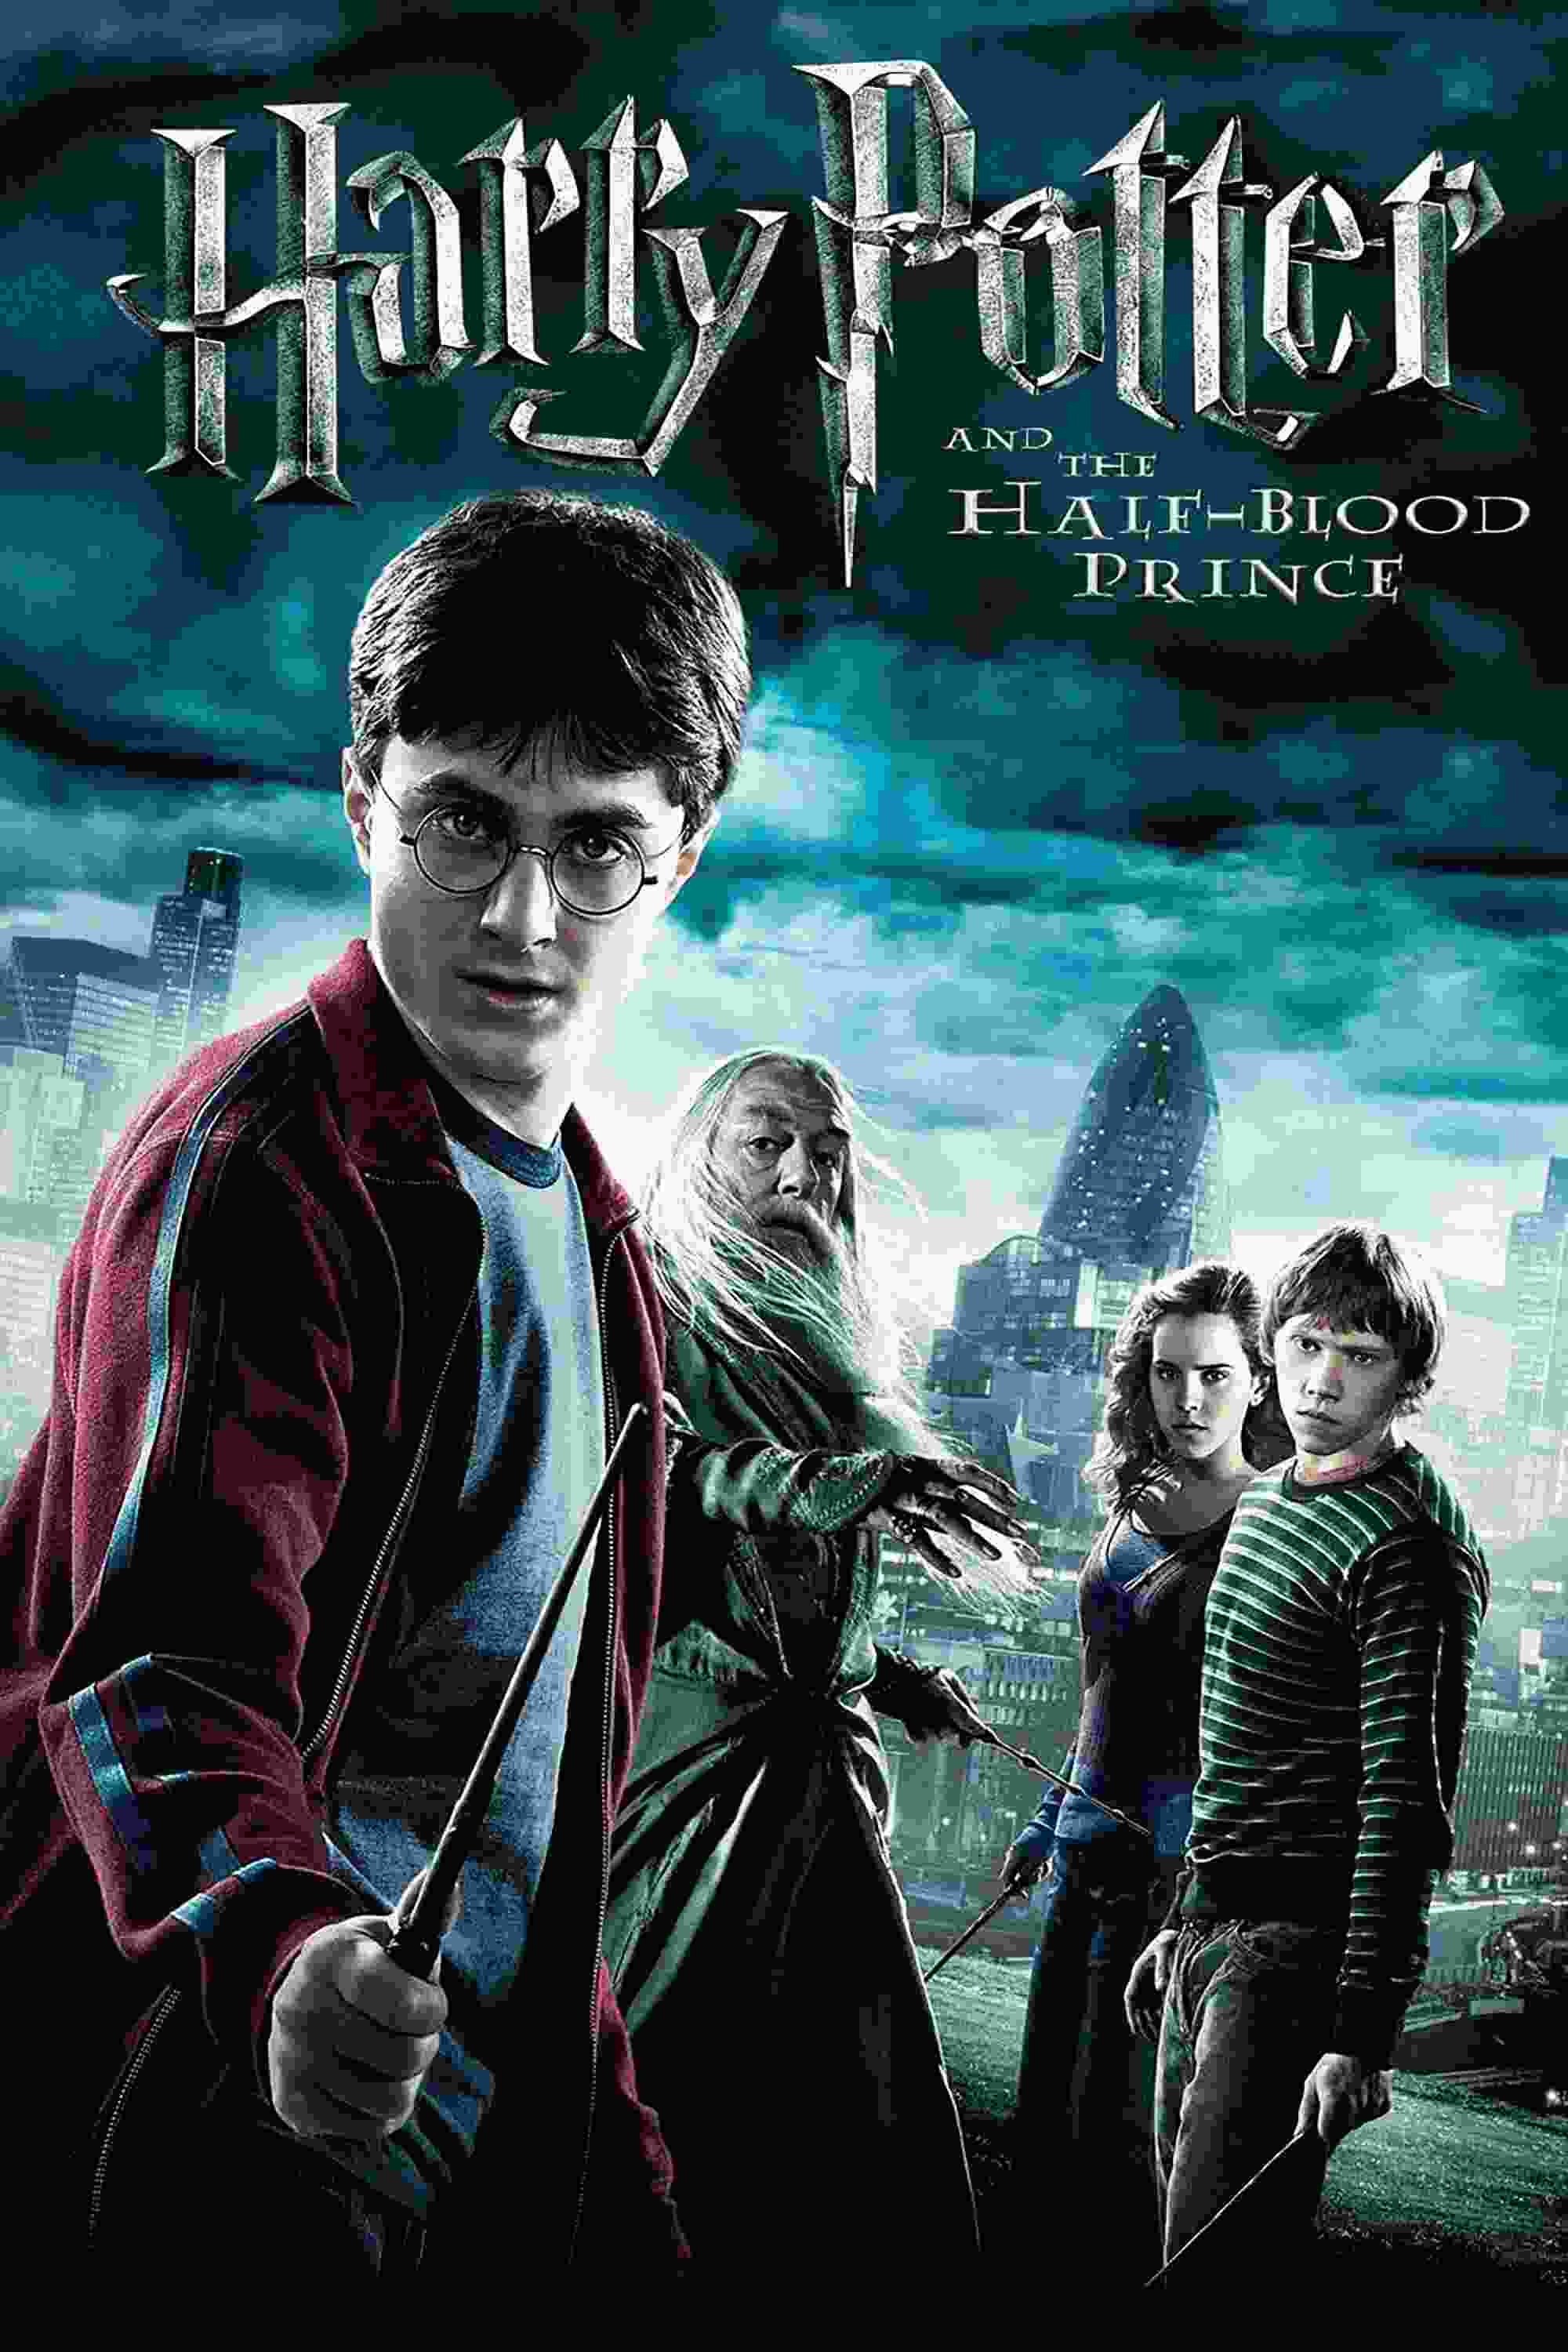 Harry Potter and the Half-Blood Prince (2009) Daniel Radcliffe